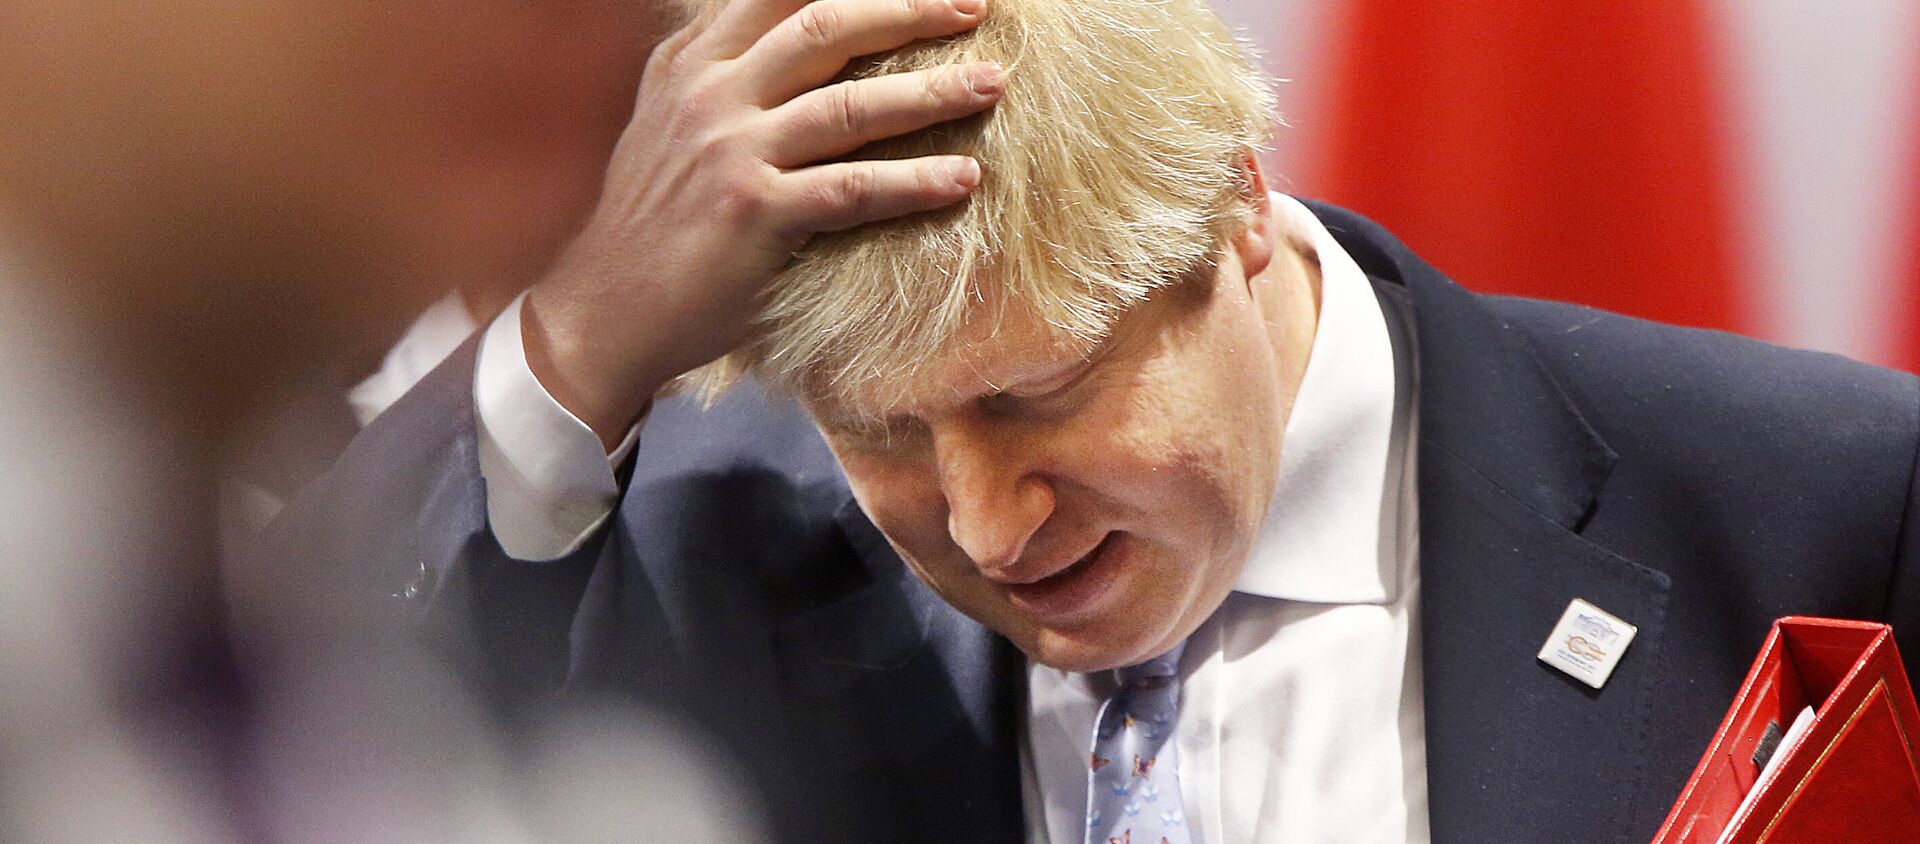 Britain's Prime Minister Boris Johnson adjusts his hair while he was Foreign Secretary at the beginning of a working session during the G-20 Foreign Ministers meeting in Bonn, Germany, Thursday, 16 February 2017.  - Sputnik International, 1920, 26.02.2021